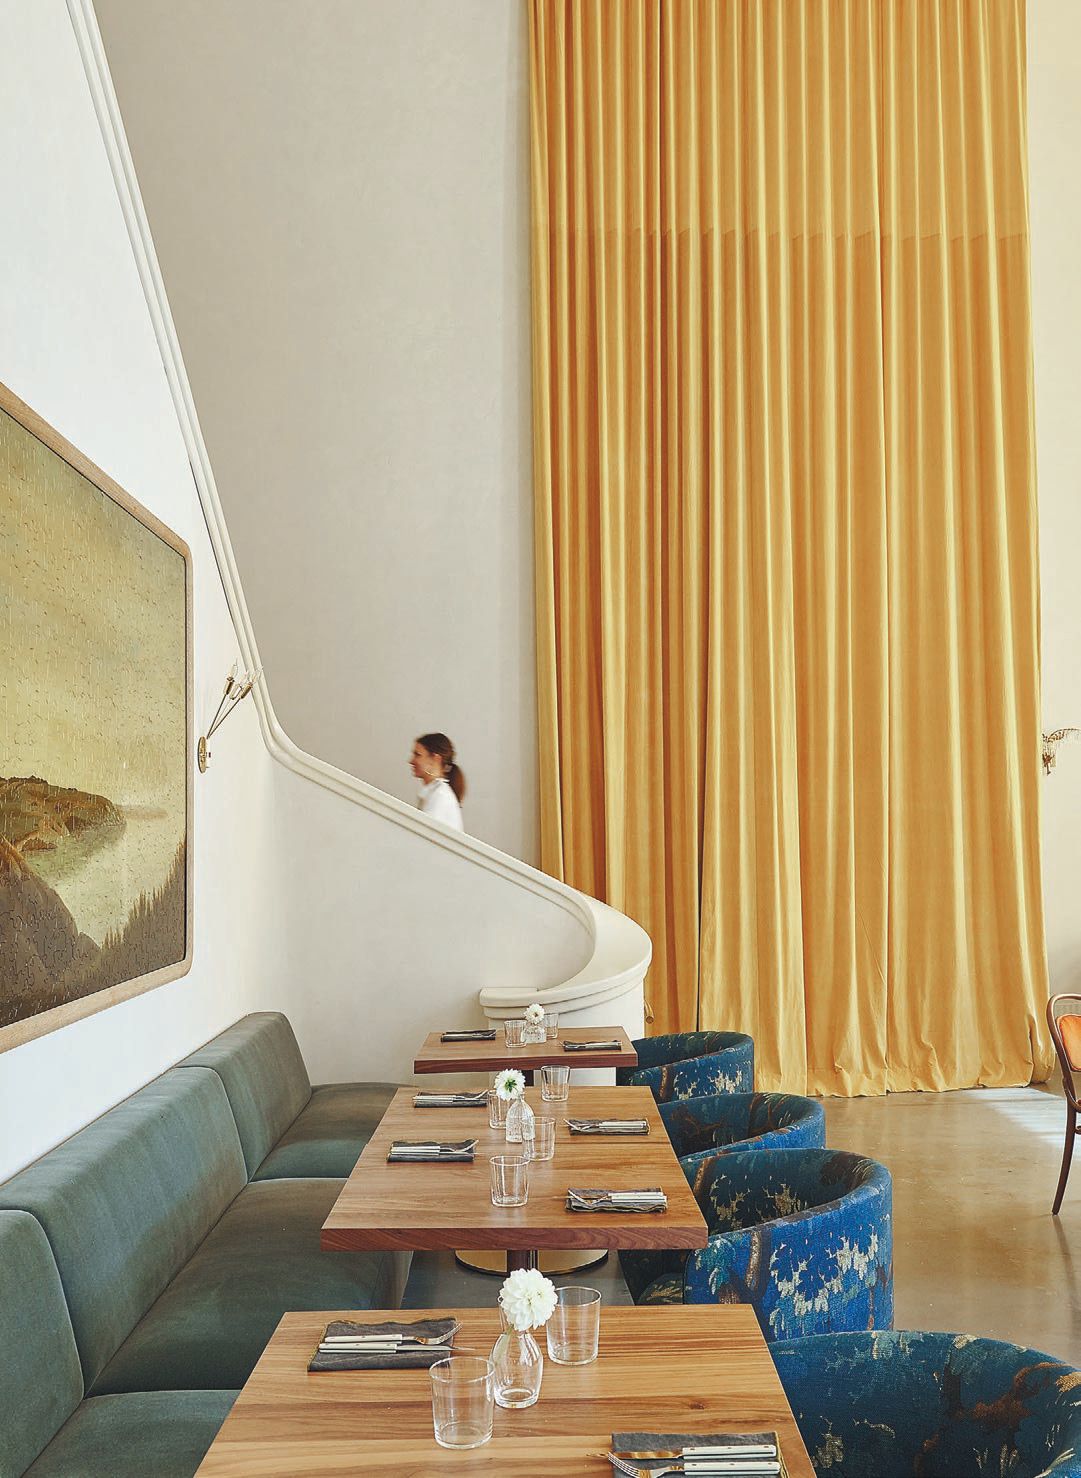 Hanging from the resto’s 25-foot ceilings are stunning hand-dyed velvet curtains inspired by chef Forough Vakili’s fond memory of harvesting saffron in fields near her childhood home in Iran PHOTO BY ANTHONY TAHLIER